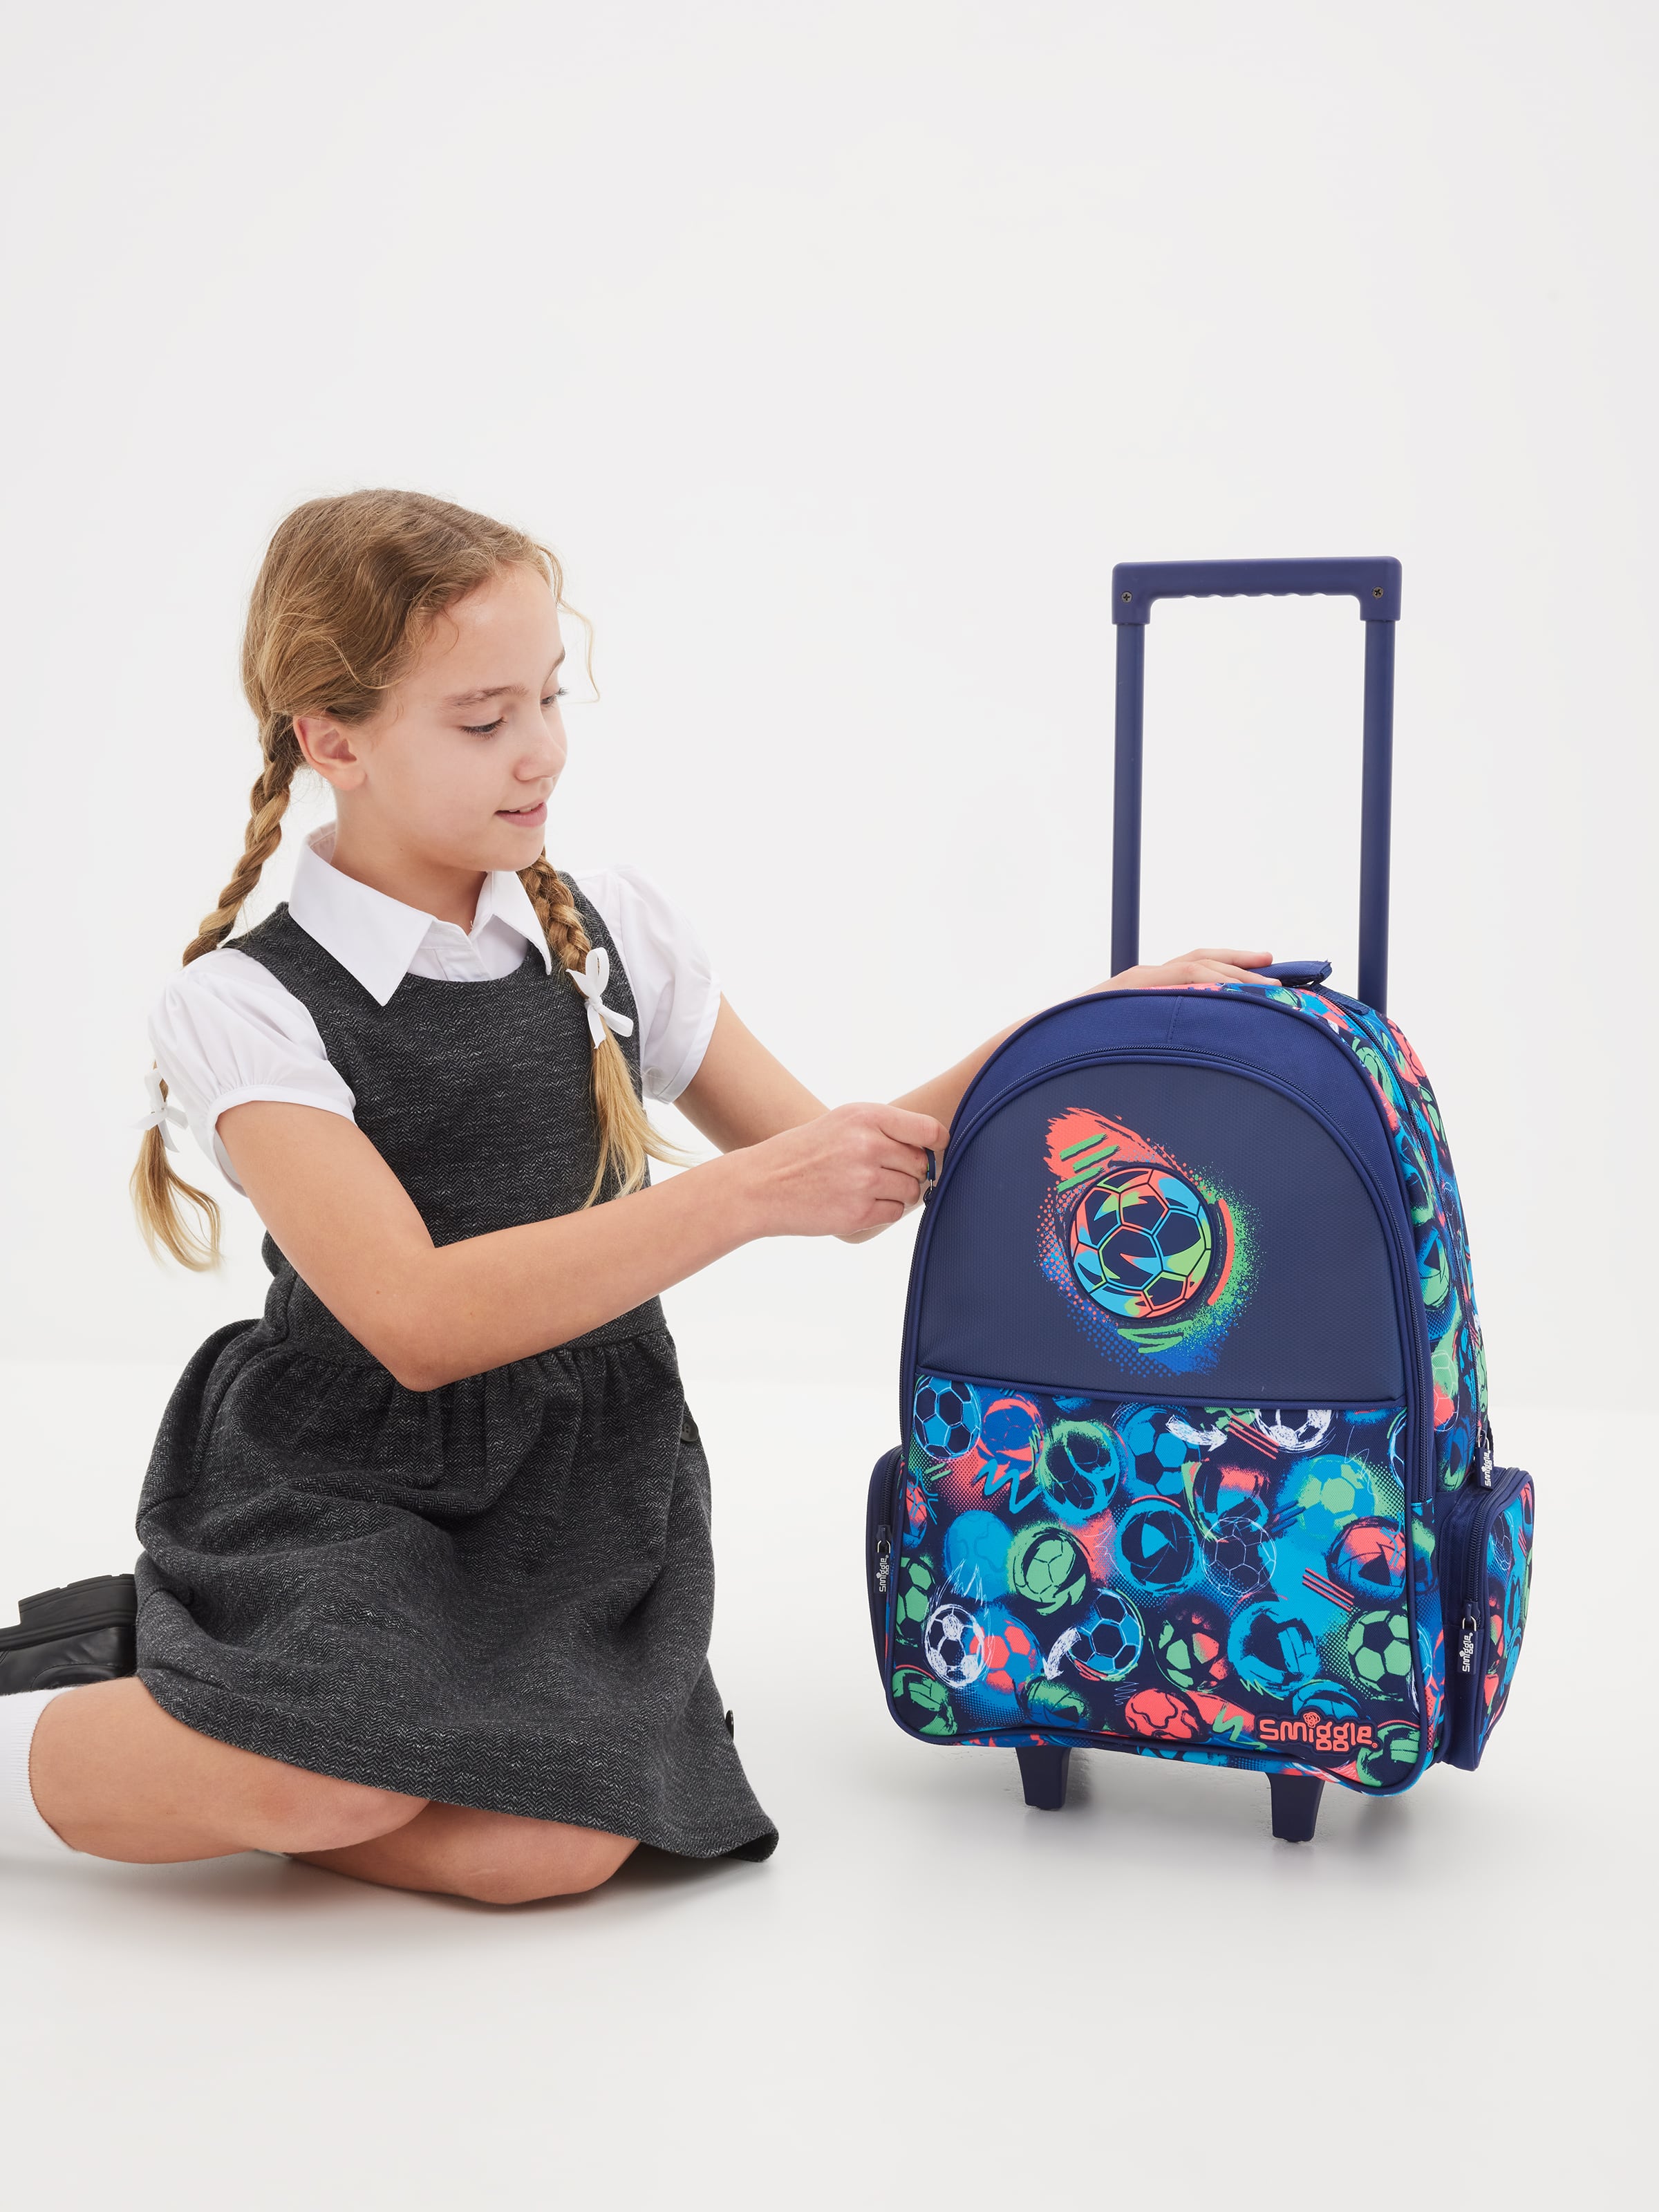 Limitless Backpack Trolley With Light Up Wheels